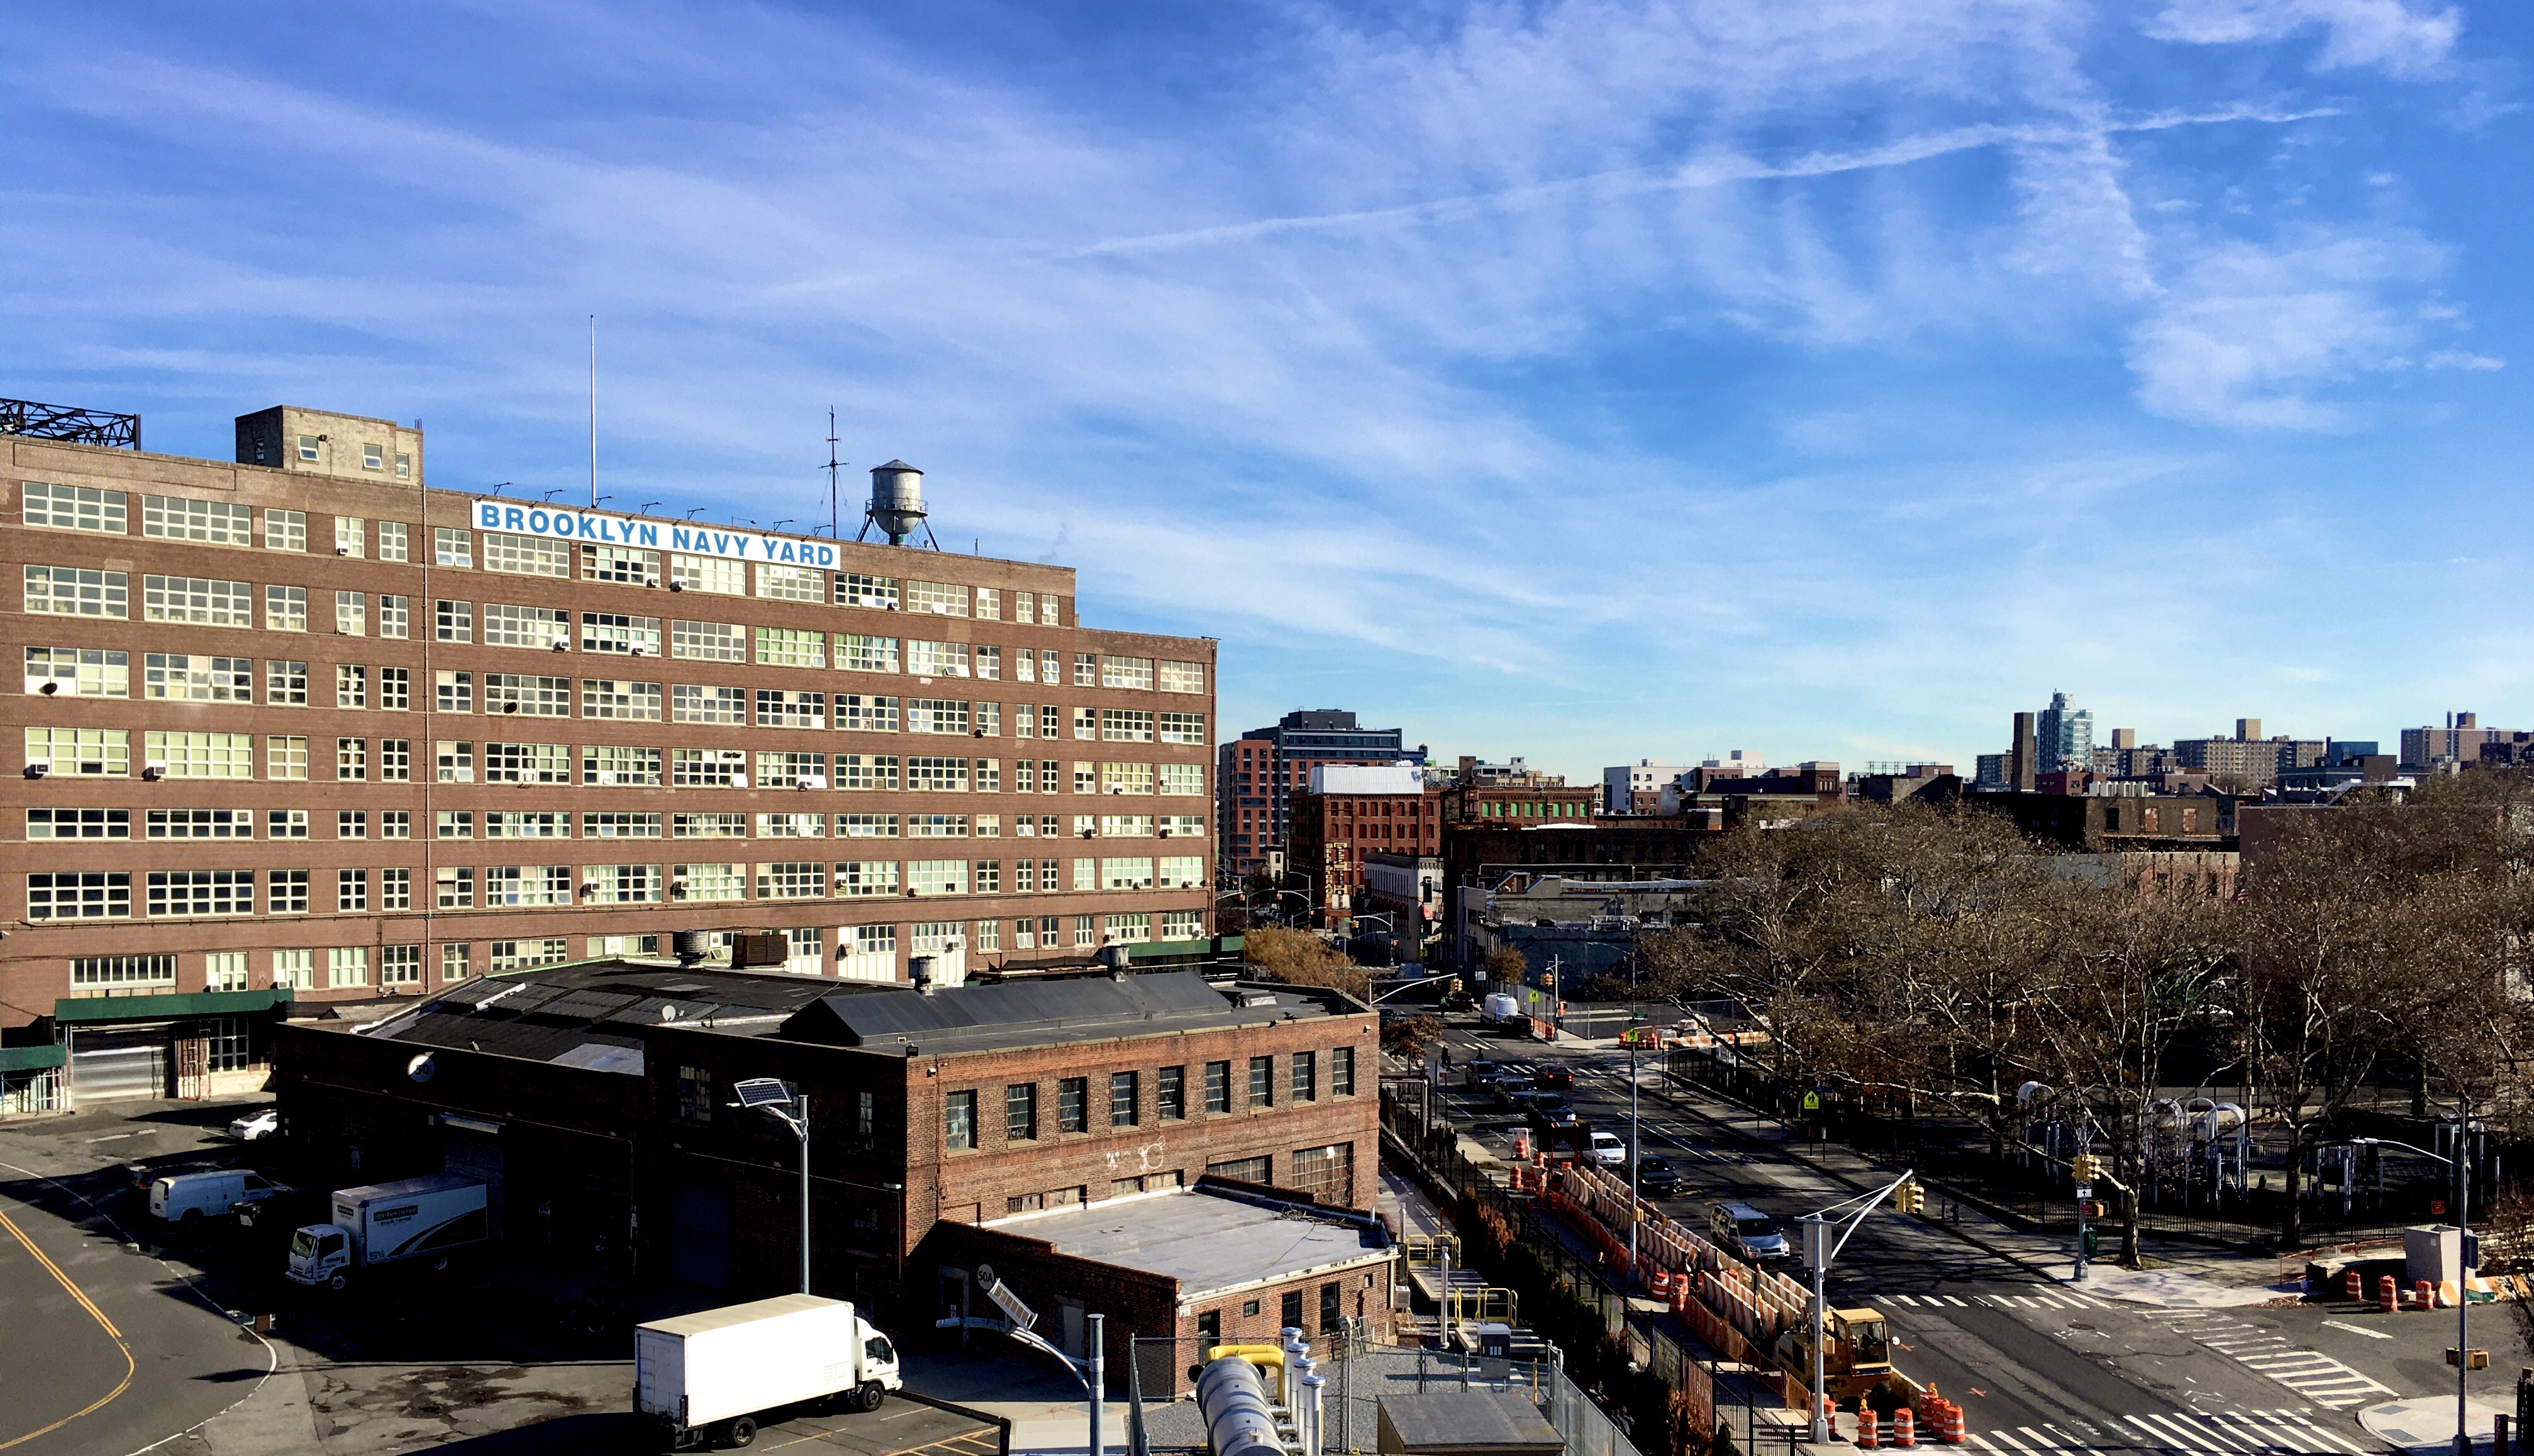 By taking a guided tour of the Brooklyn Navy Yard, you get to see parts of the 300-acre complex that are off limits to the general public. Photo: Lore Croghan/Brooklyn Eagle